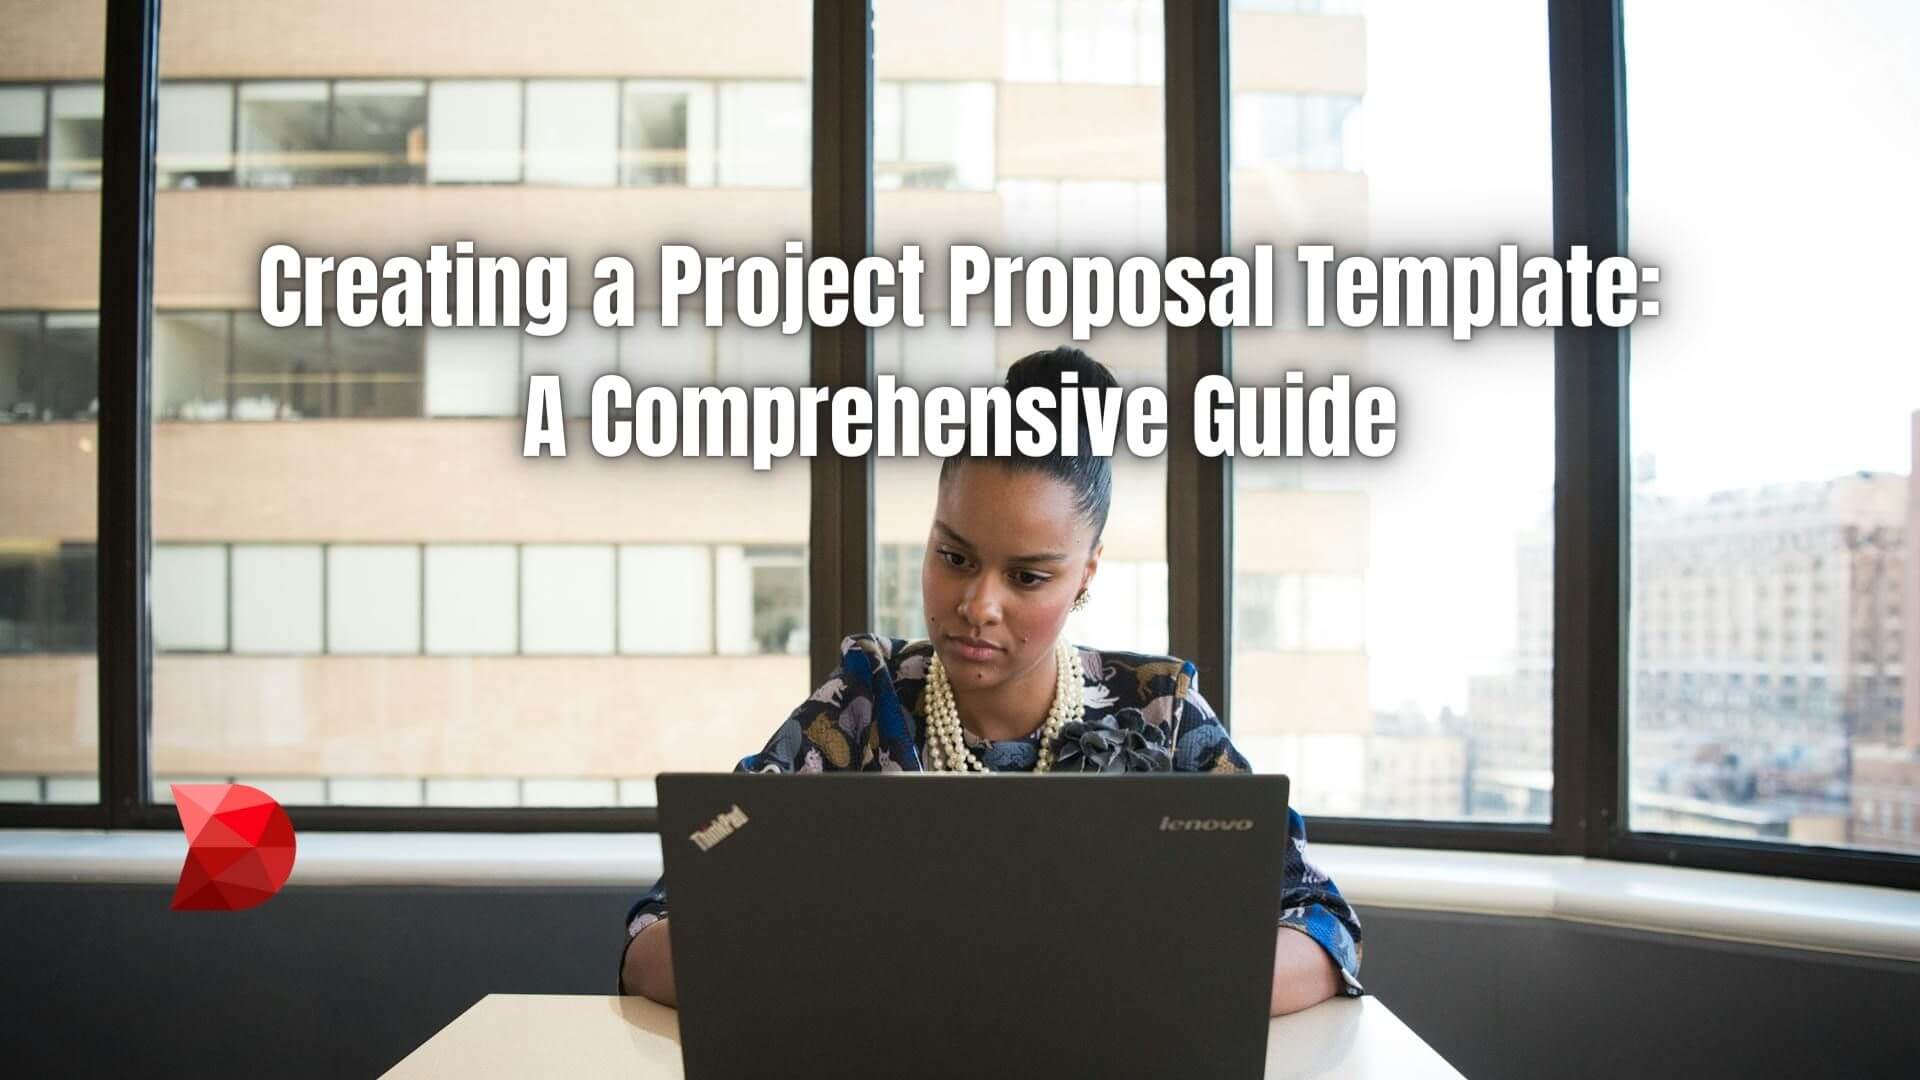 Empower your project proposal game with our step-by-step guide. Learn to create a winning project proposal template effortlessly.